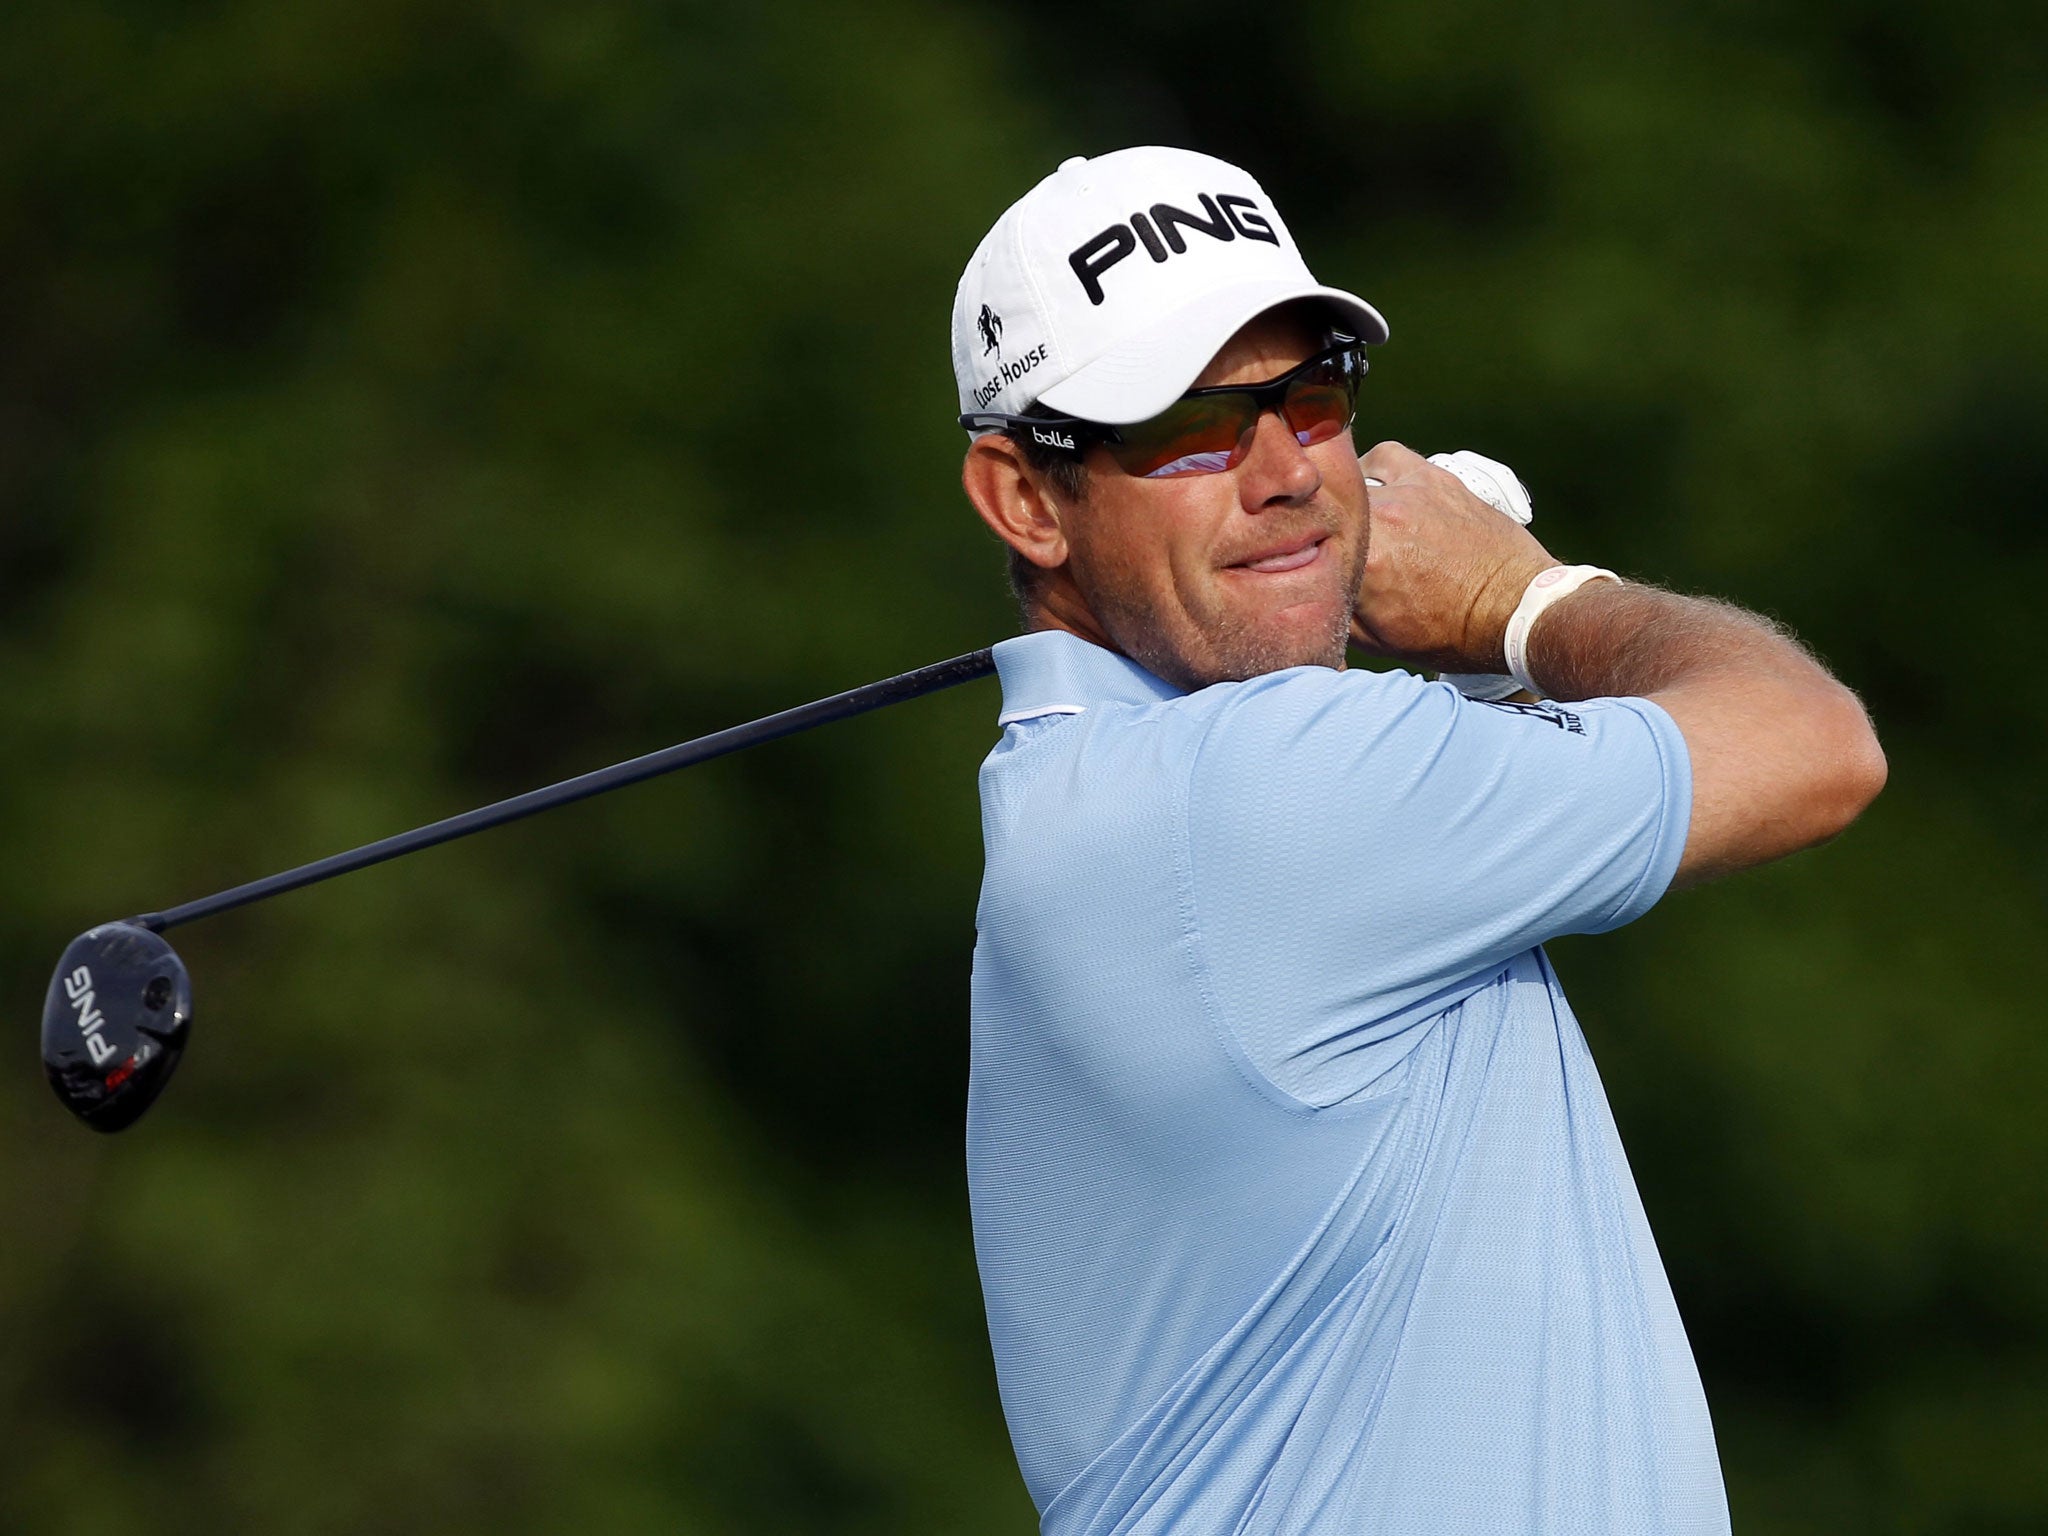 Lee Westwood: Endured another disappointing day by posting an opening-round score of 74